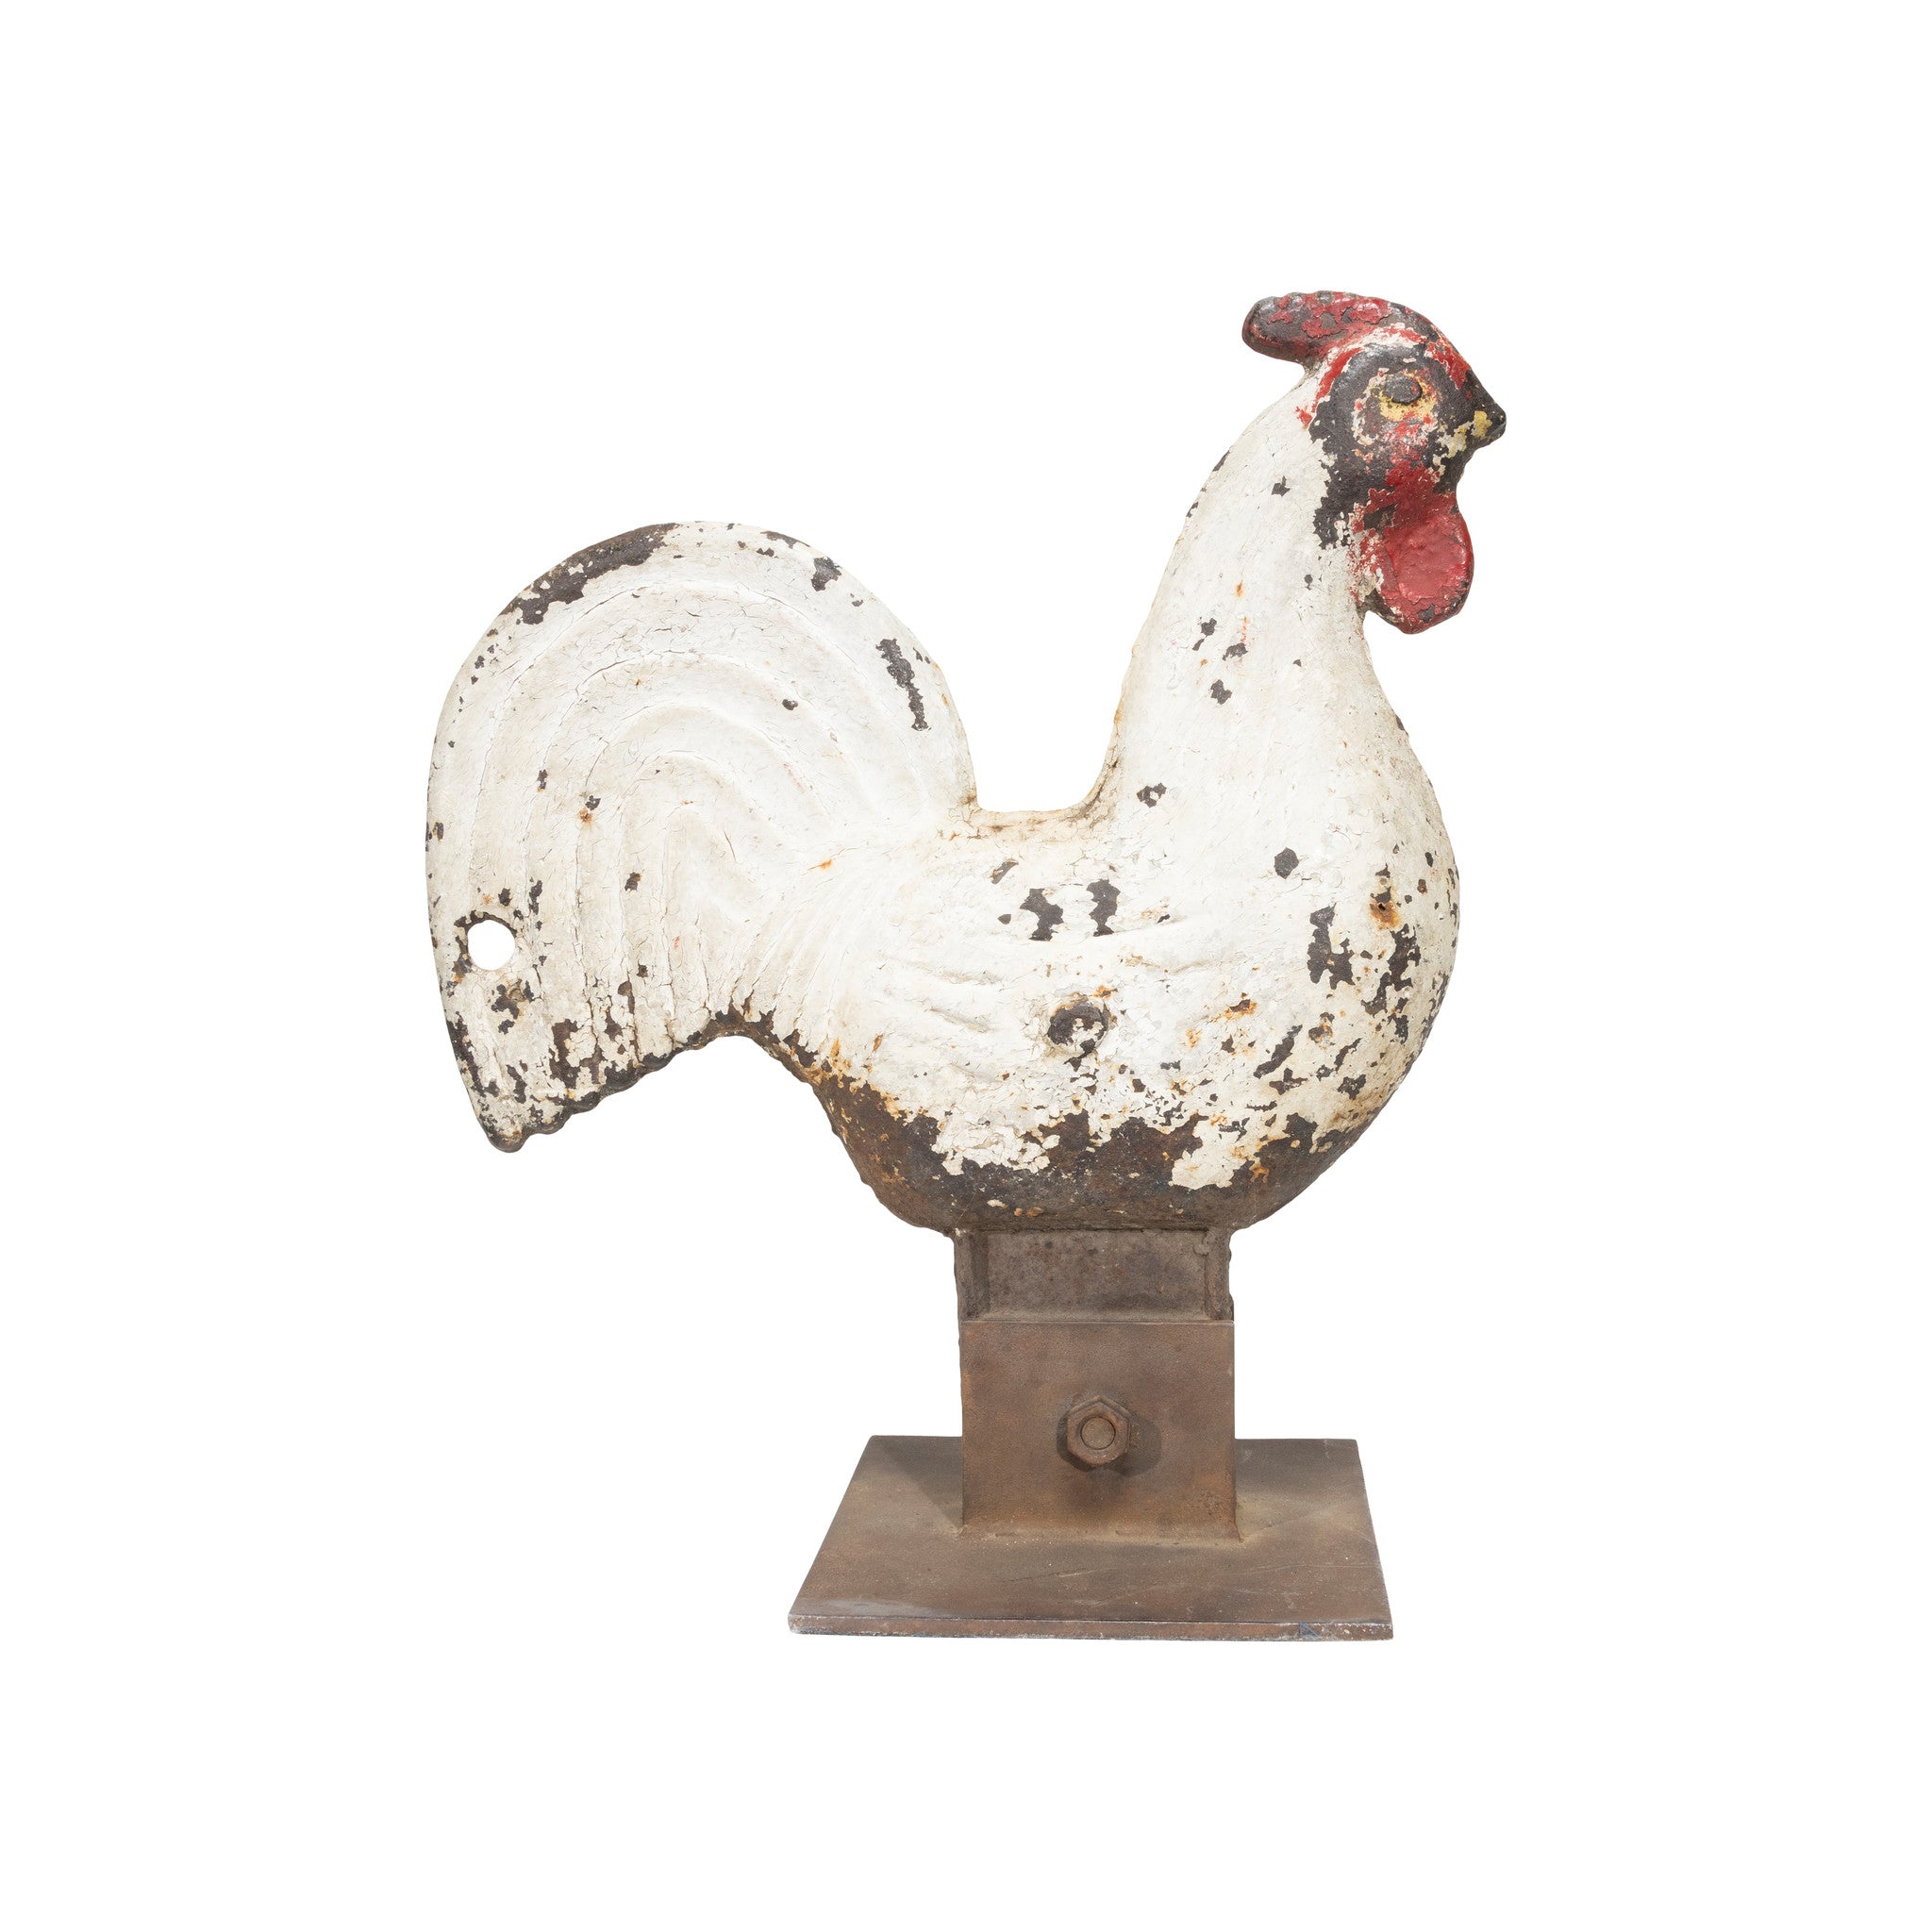 Rooster Windmill Weight